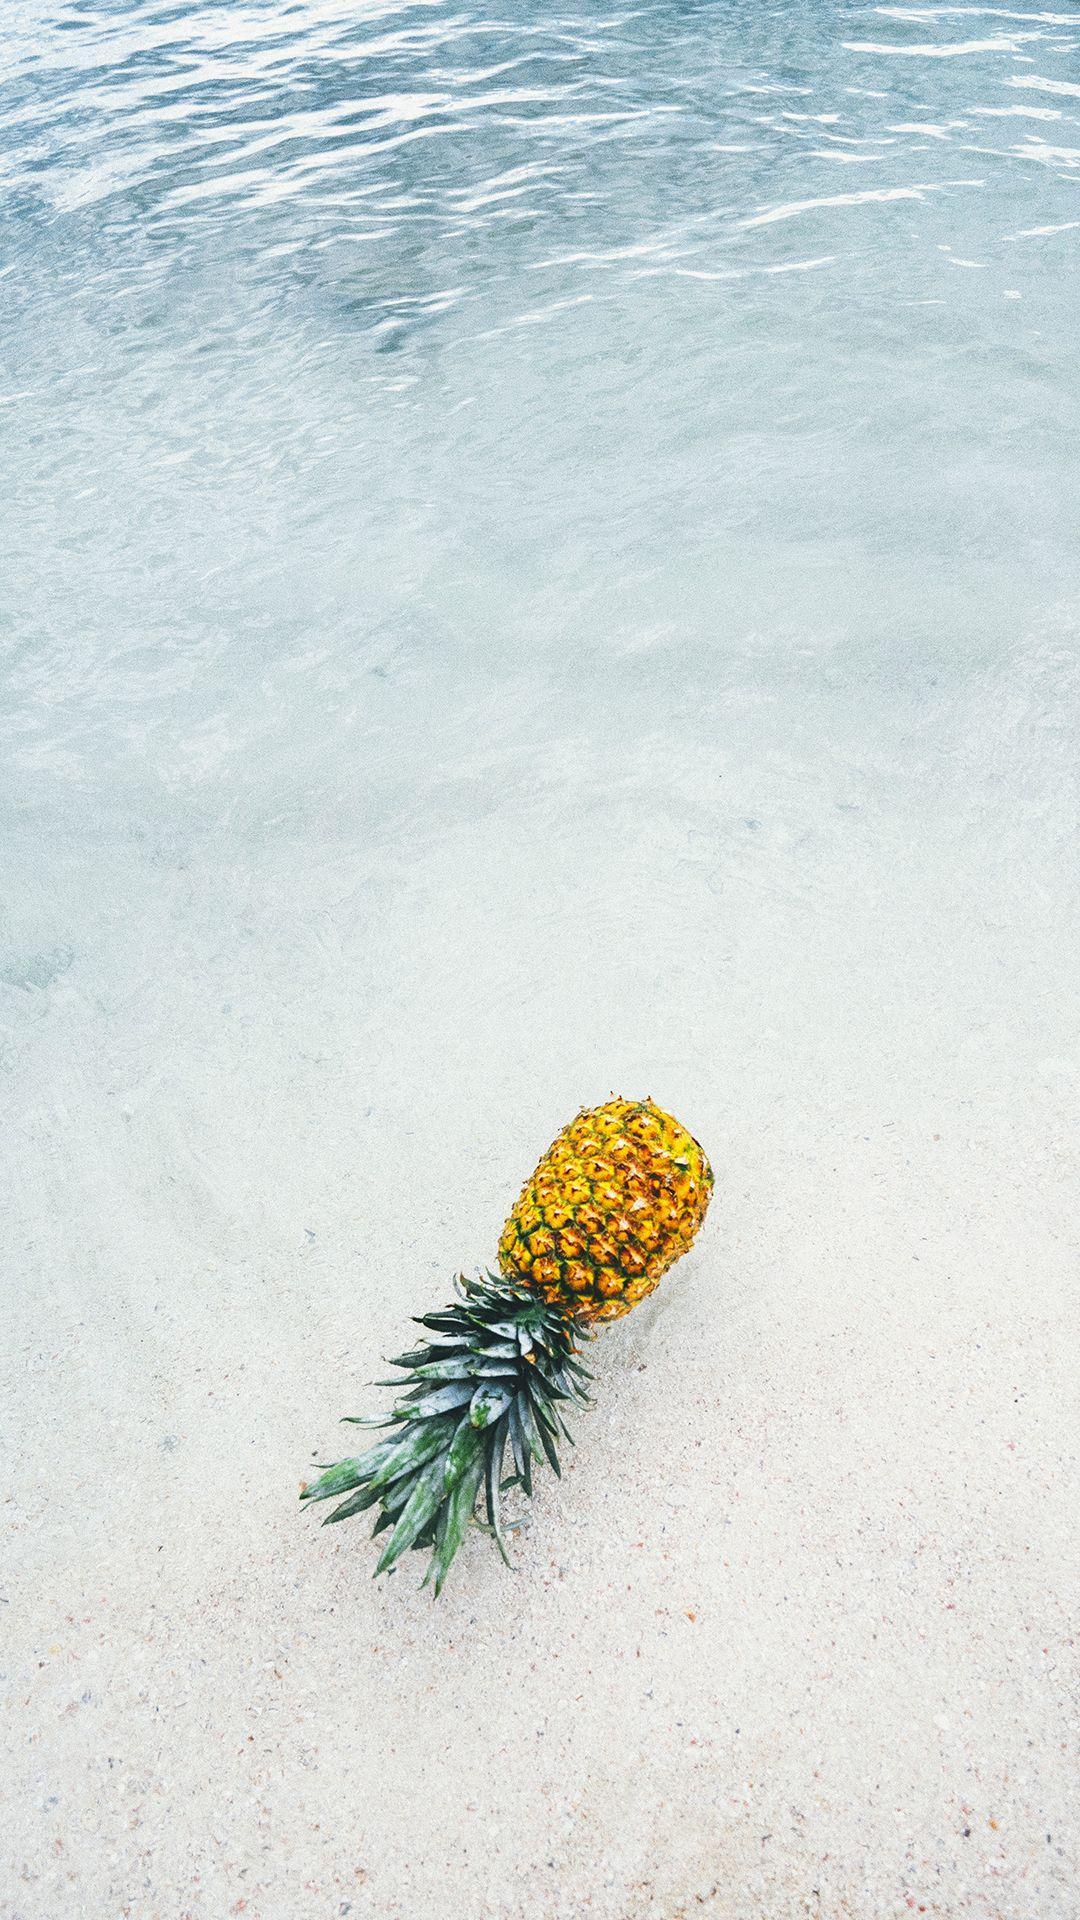 Cool Pineapple Background for iPhones Supply Co